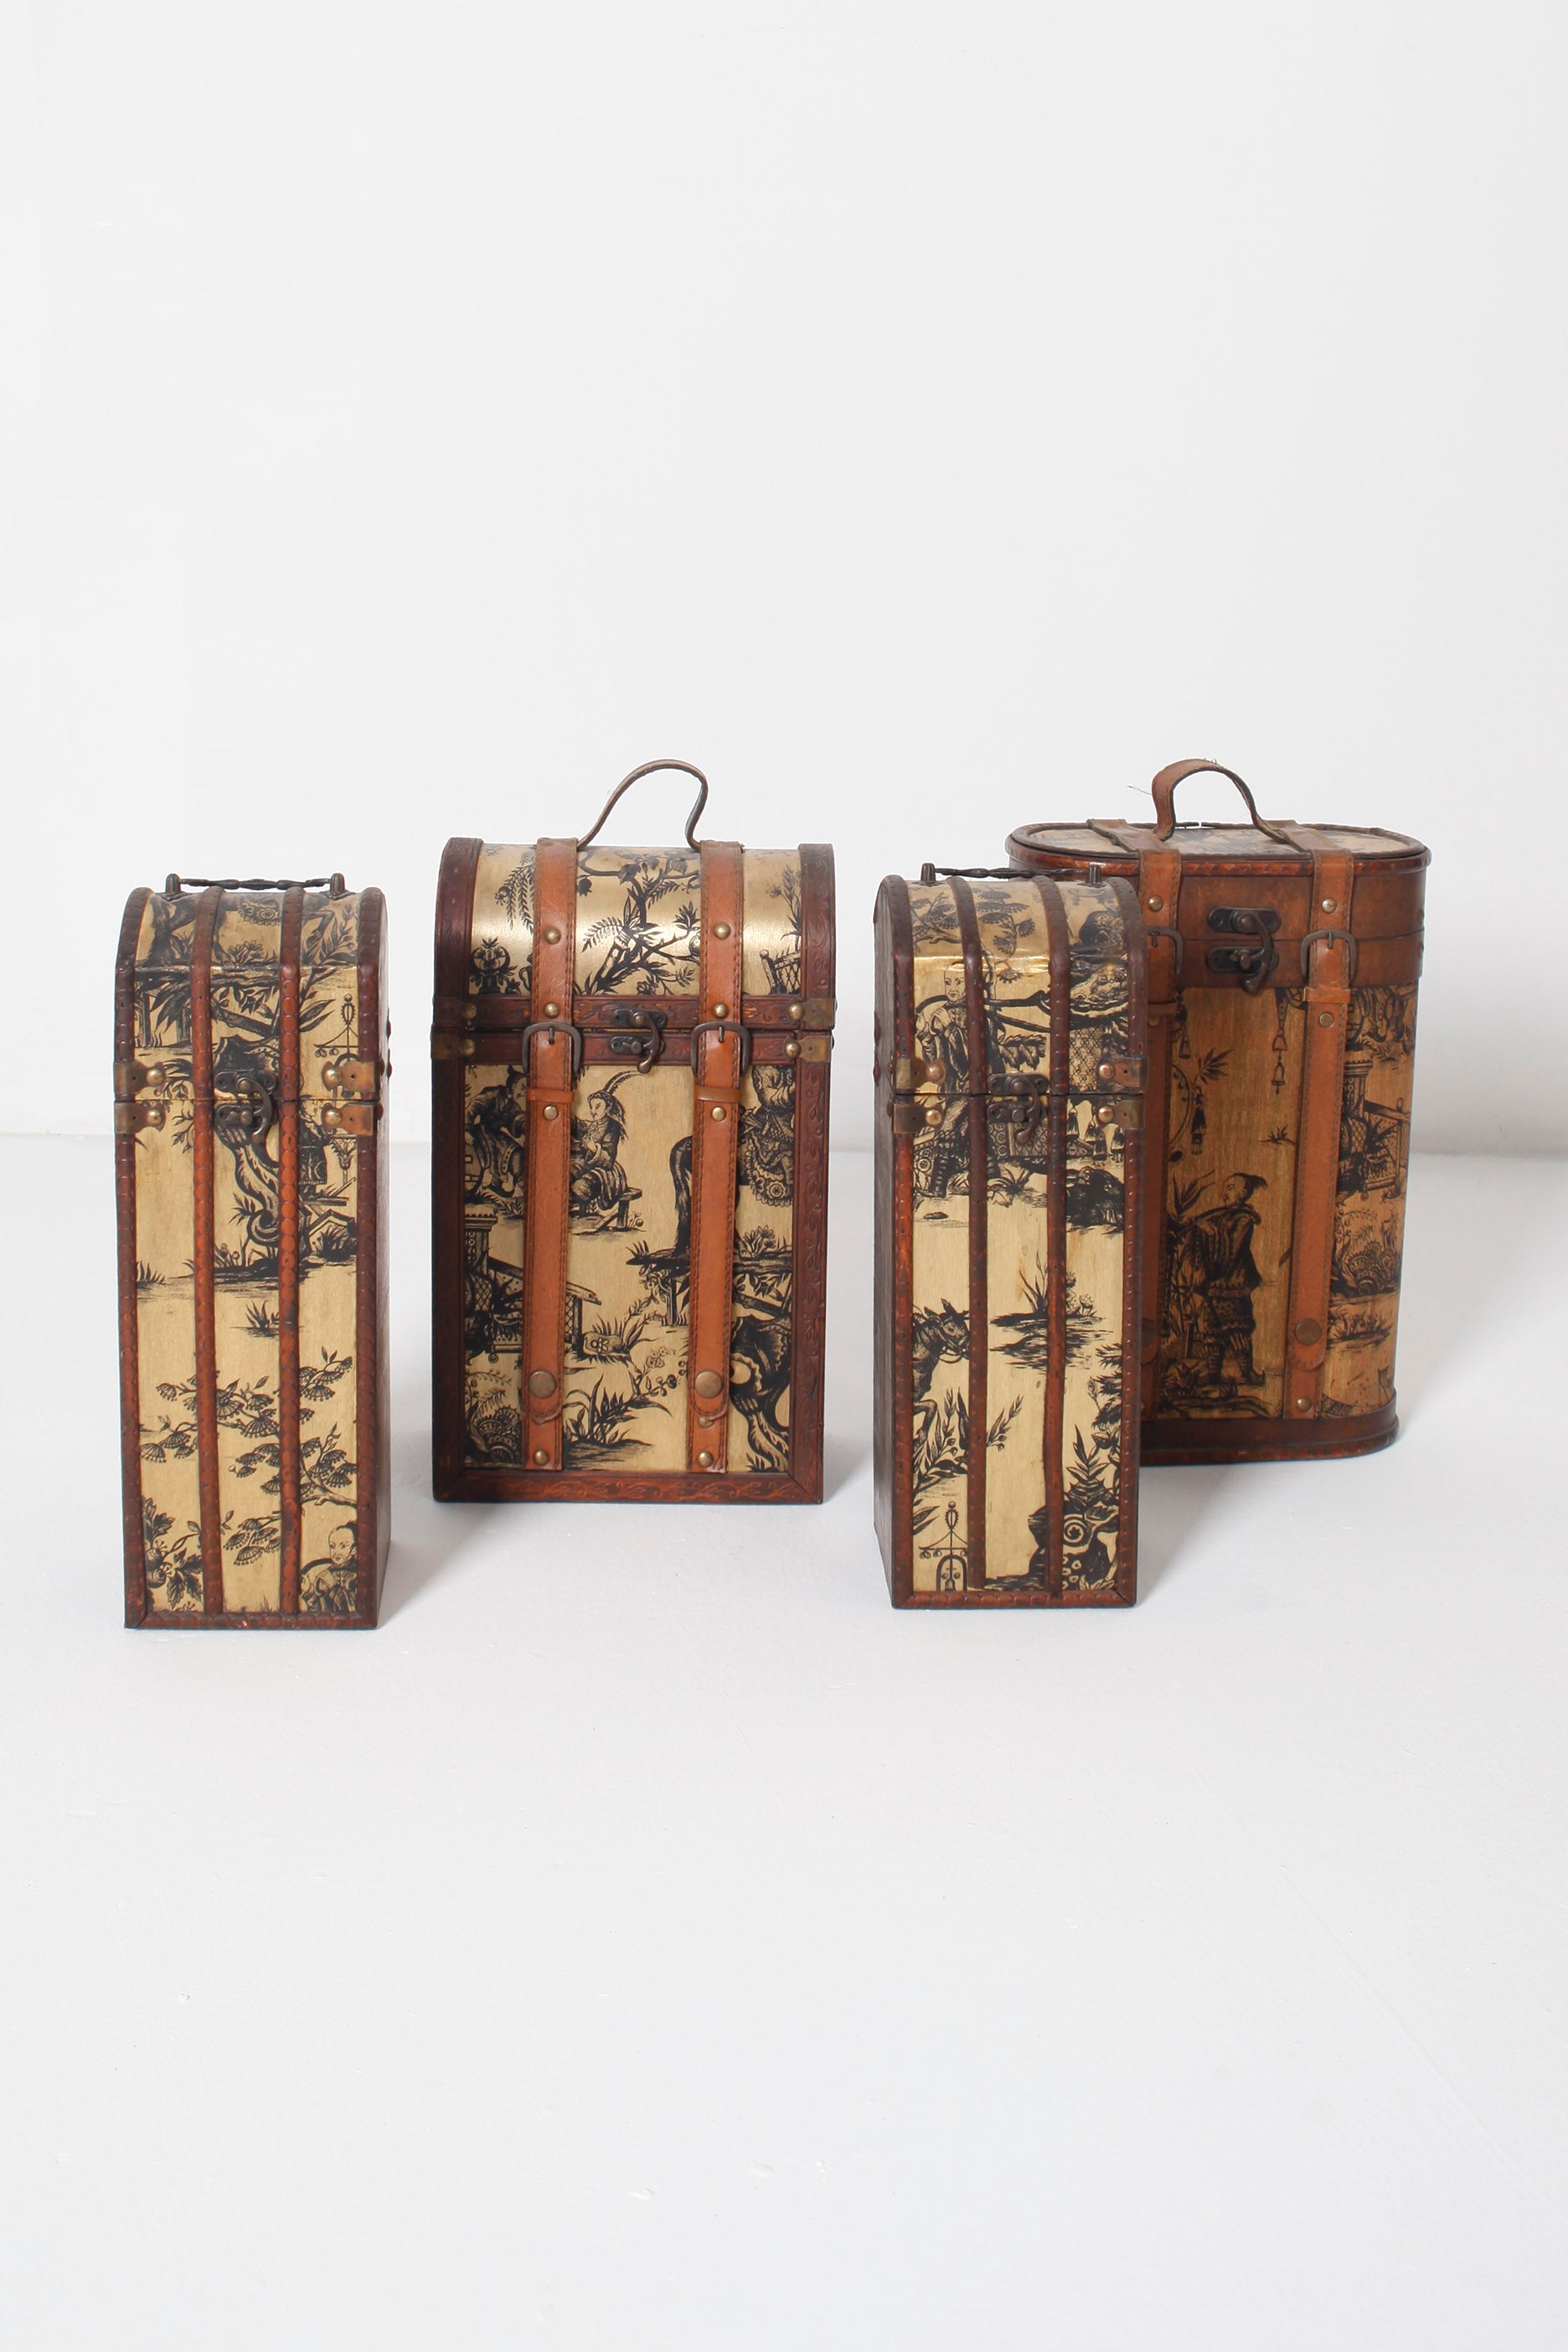 Set of Vintage Chinese Wooden Boxes (4 pieces)